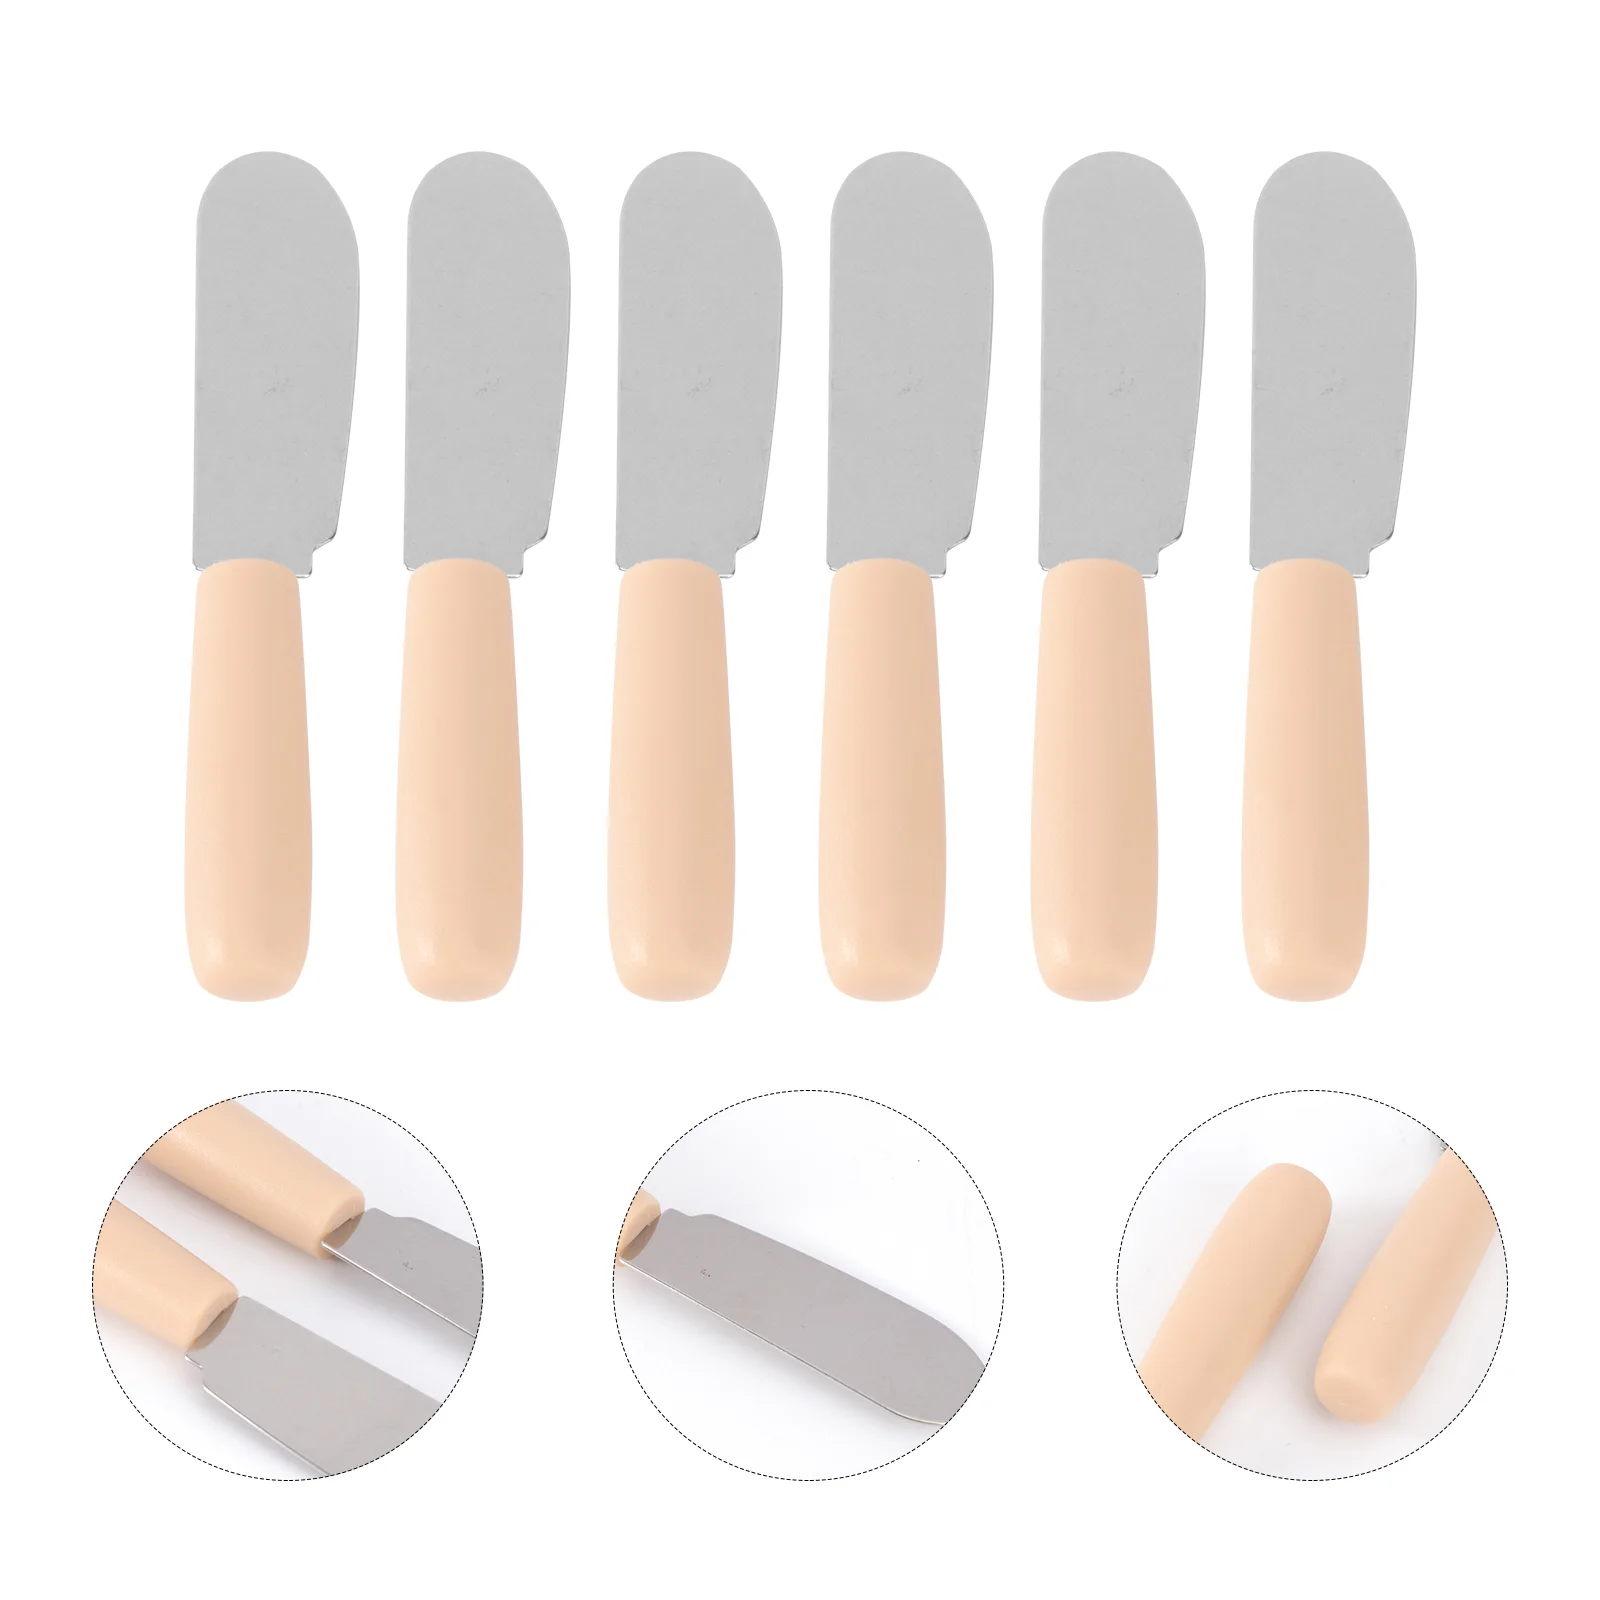 

Butter Spreader Knife Cheese Stainless Steel Sperater Knives Set Cold Spatula Jam Scraper Plastic Cake Metal Handle Cream